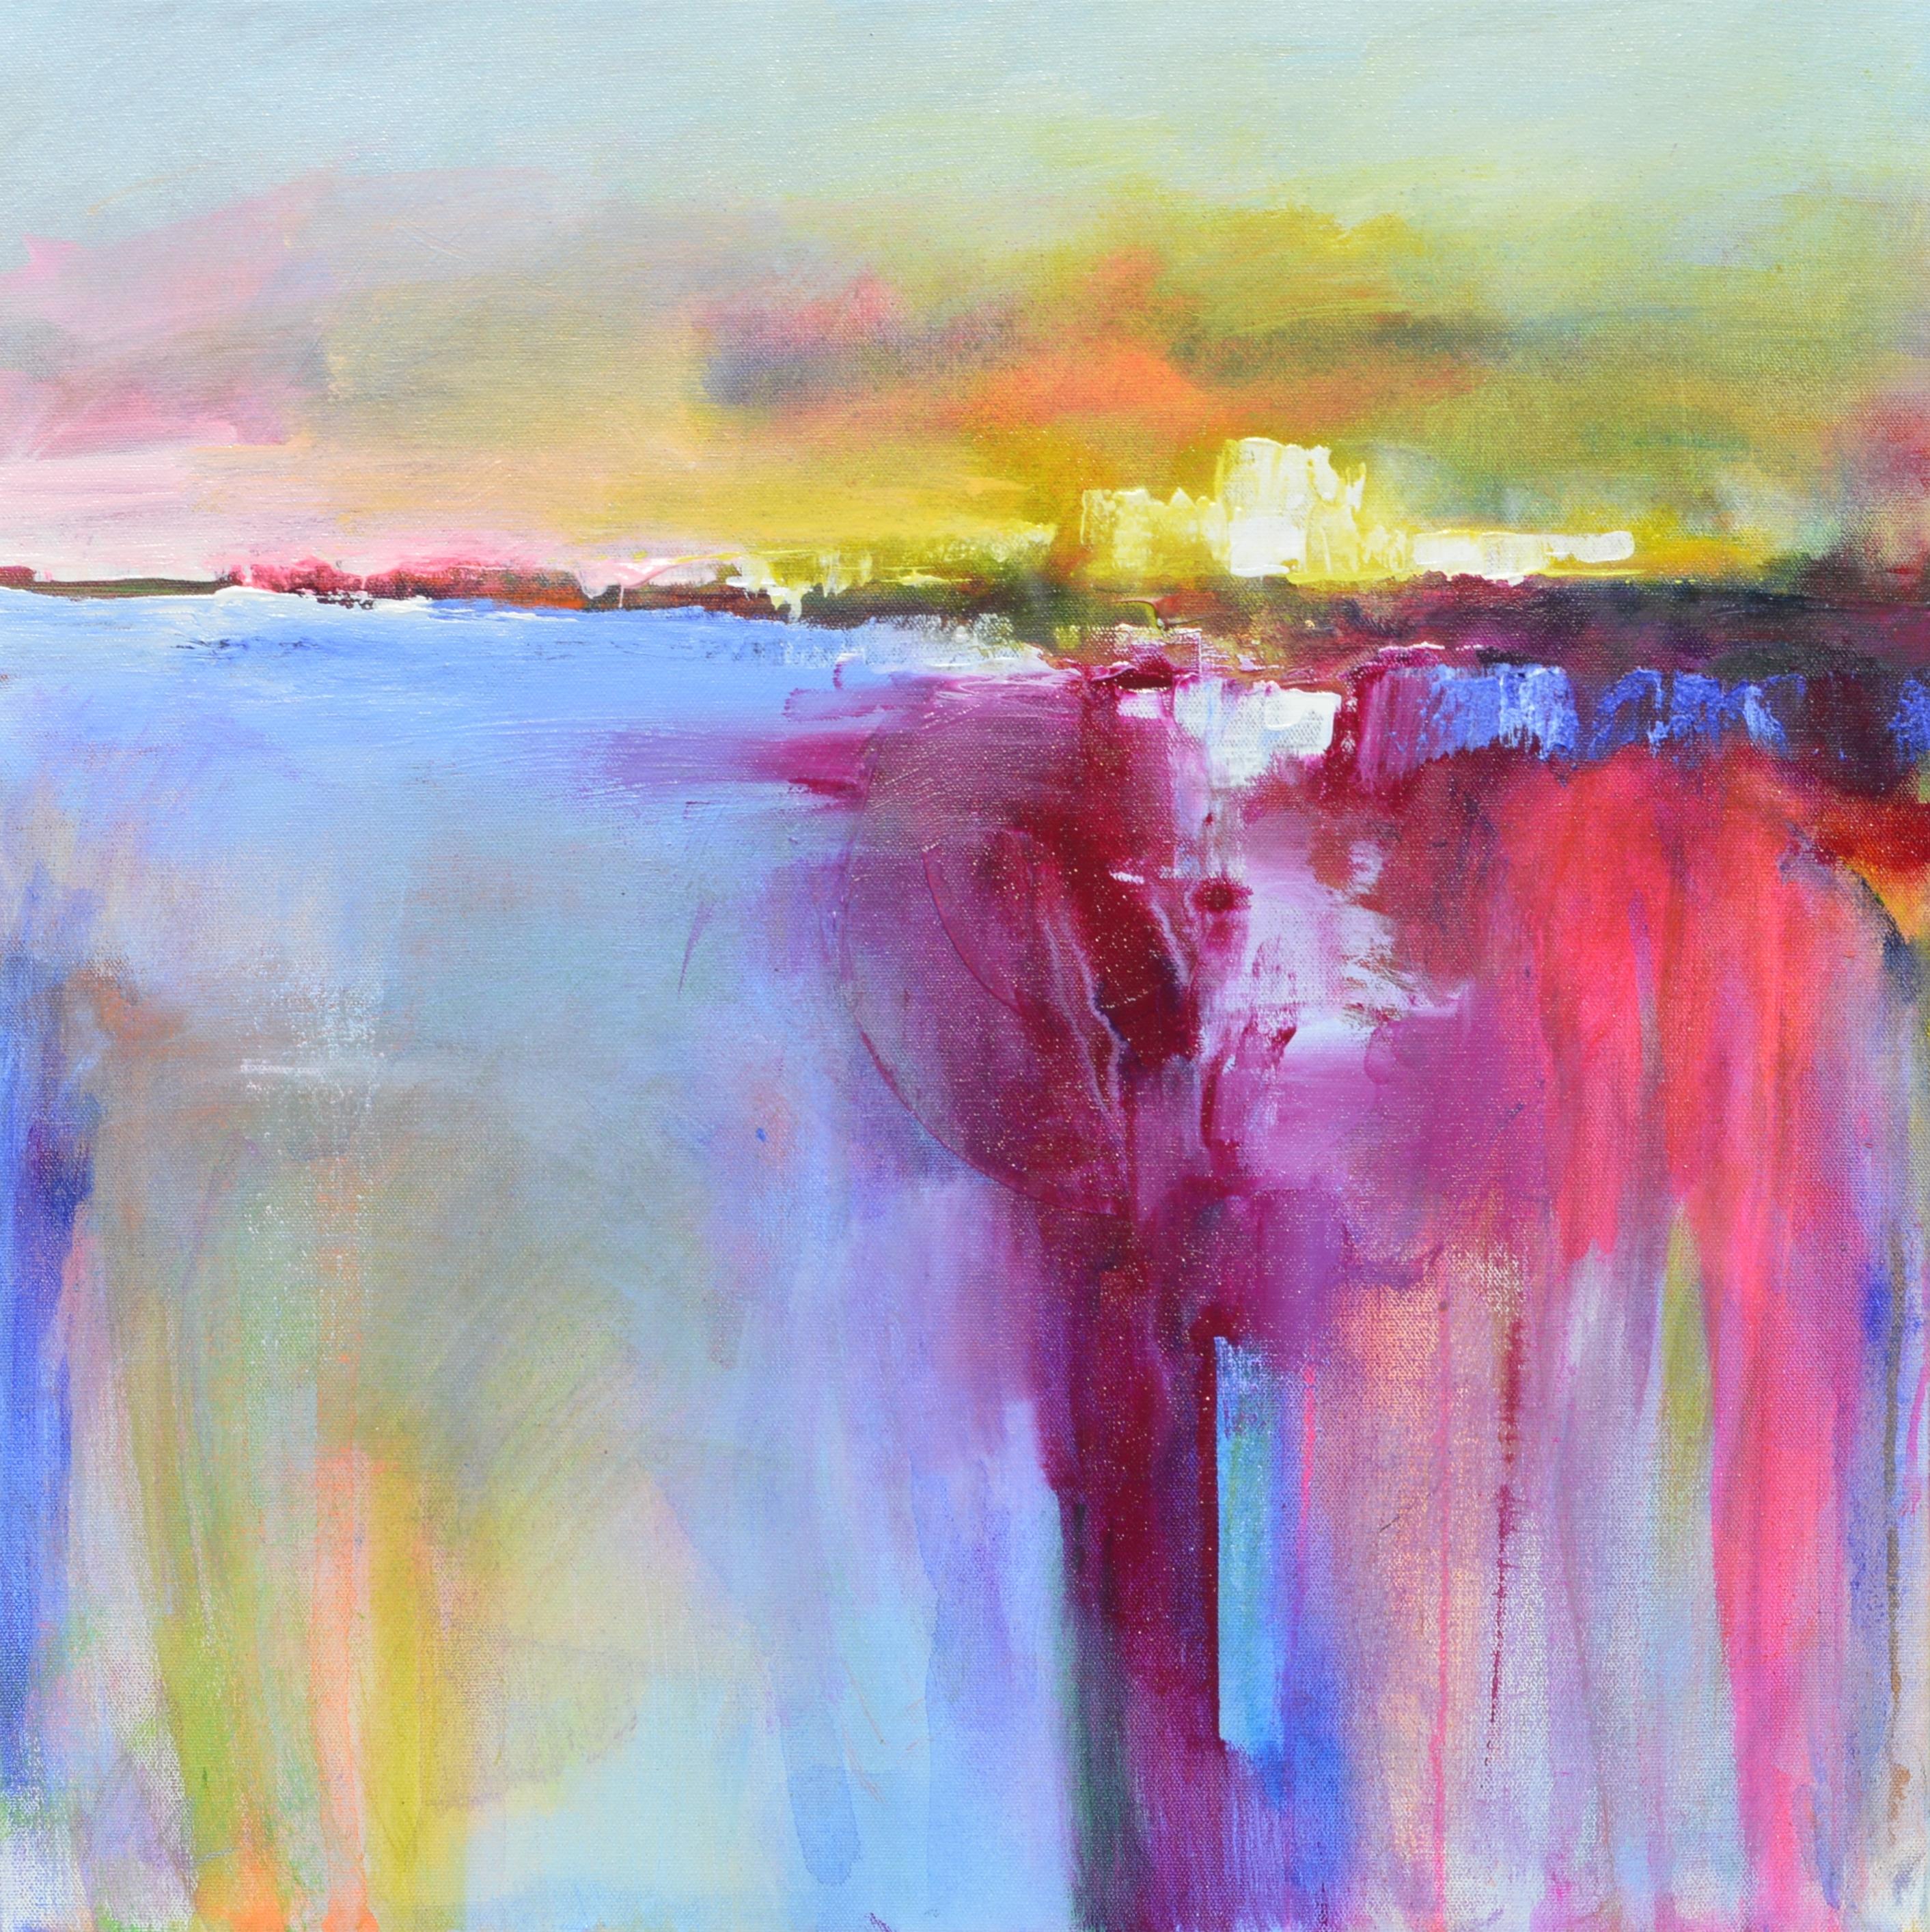 Patrick O'Boyle - Landscape Abstraction - The Color Fields For Sale at ...